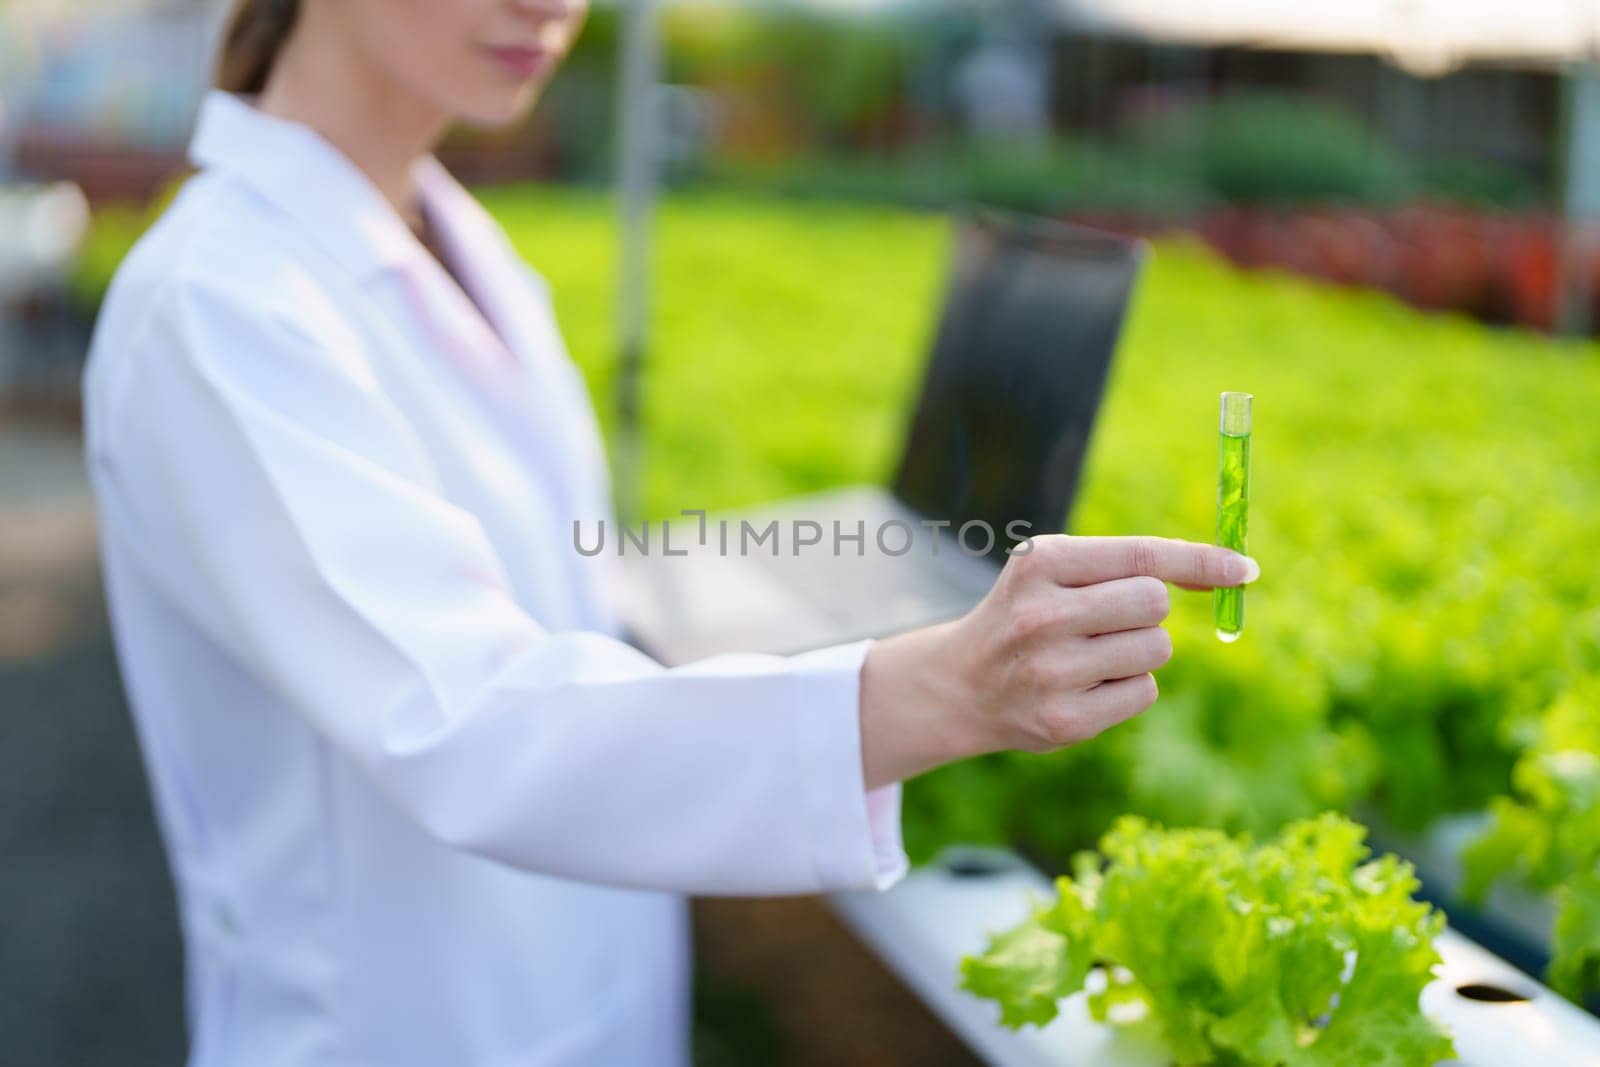 Woman Farmer harvesting vegetable and audit quality from hydroponics farm. Organic fresh vegetable, Farmer working with hydroponic vegetables garden harvesting, small business concepts. by Manastrong